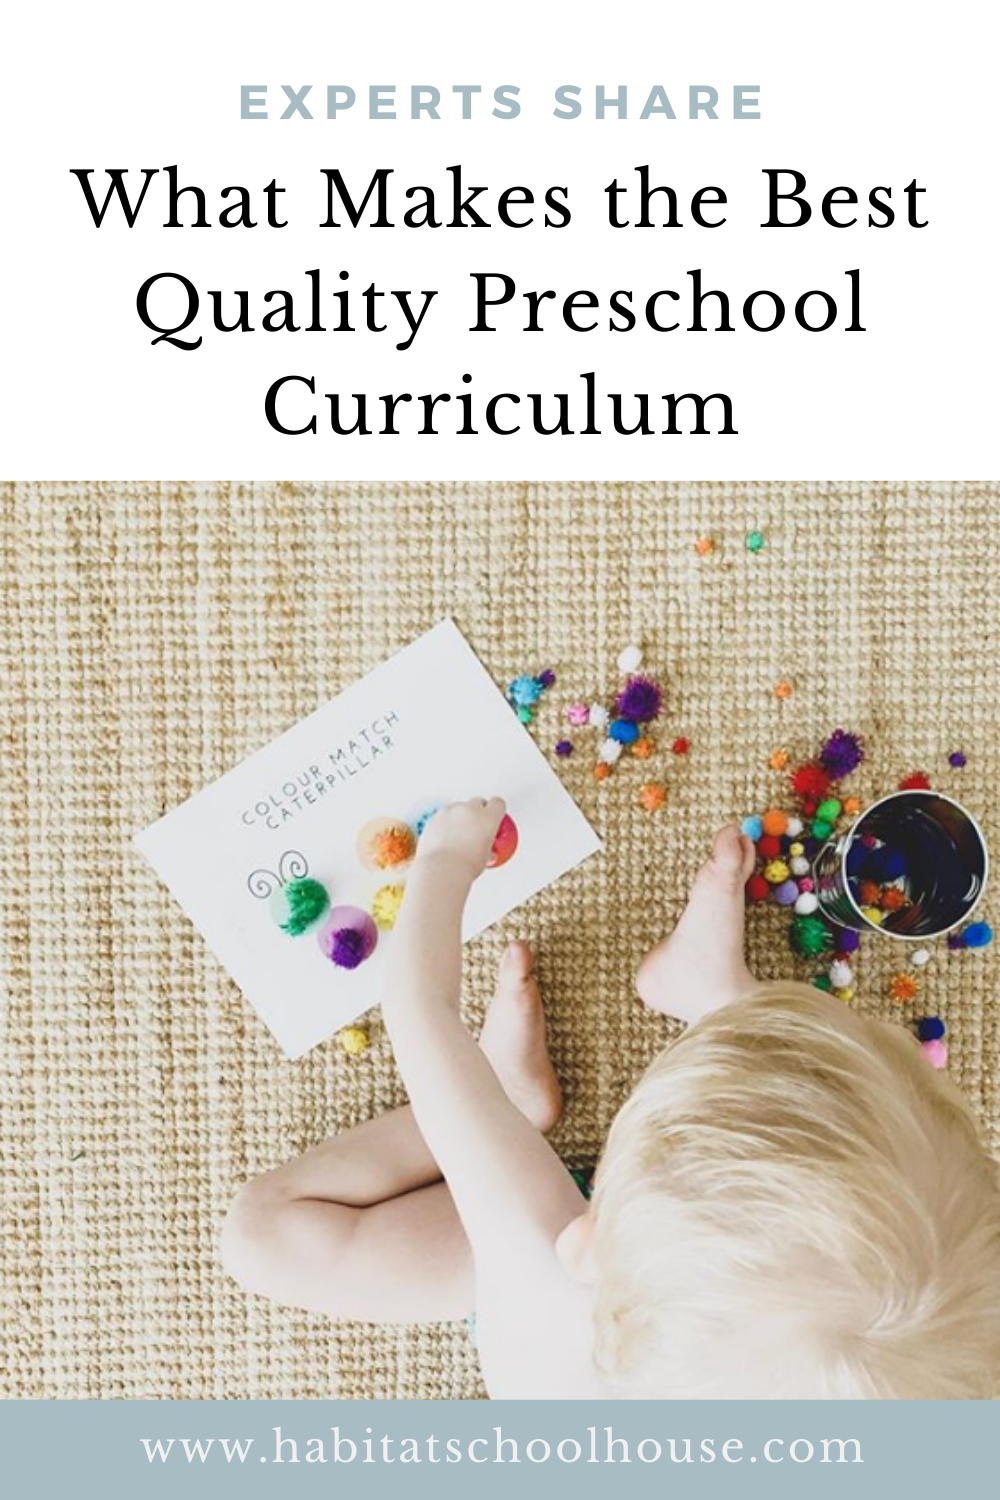 What Makes the Best Quality Preschool Curriculum.png